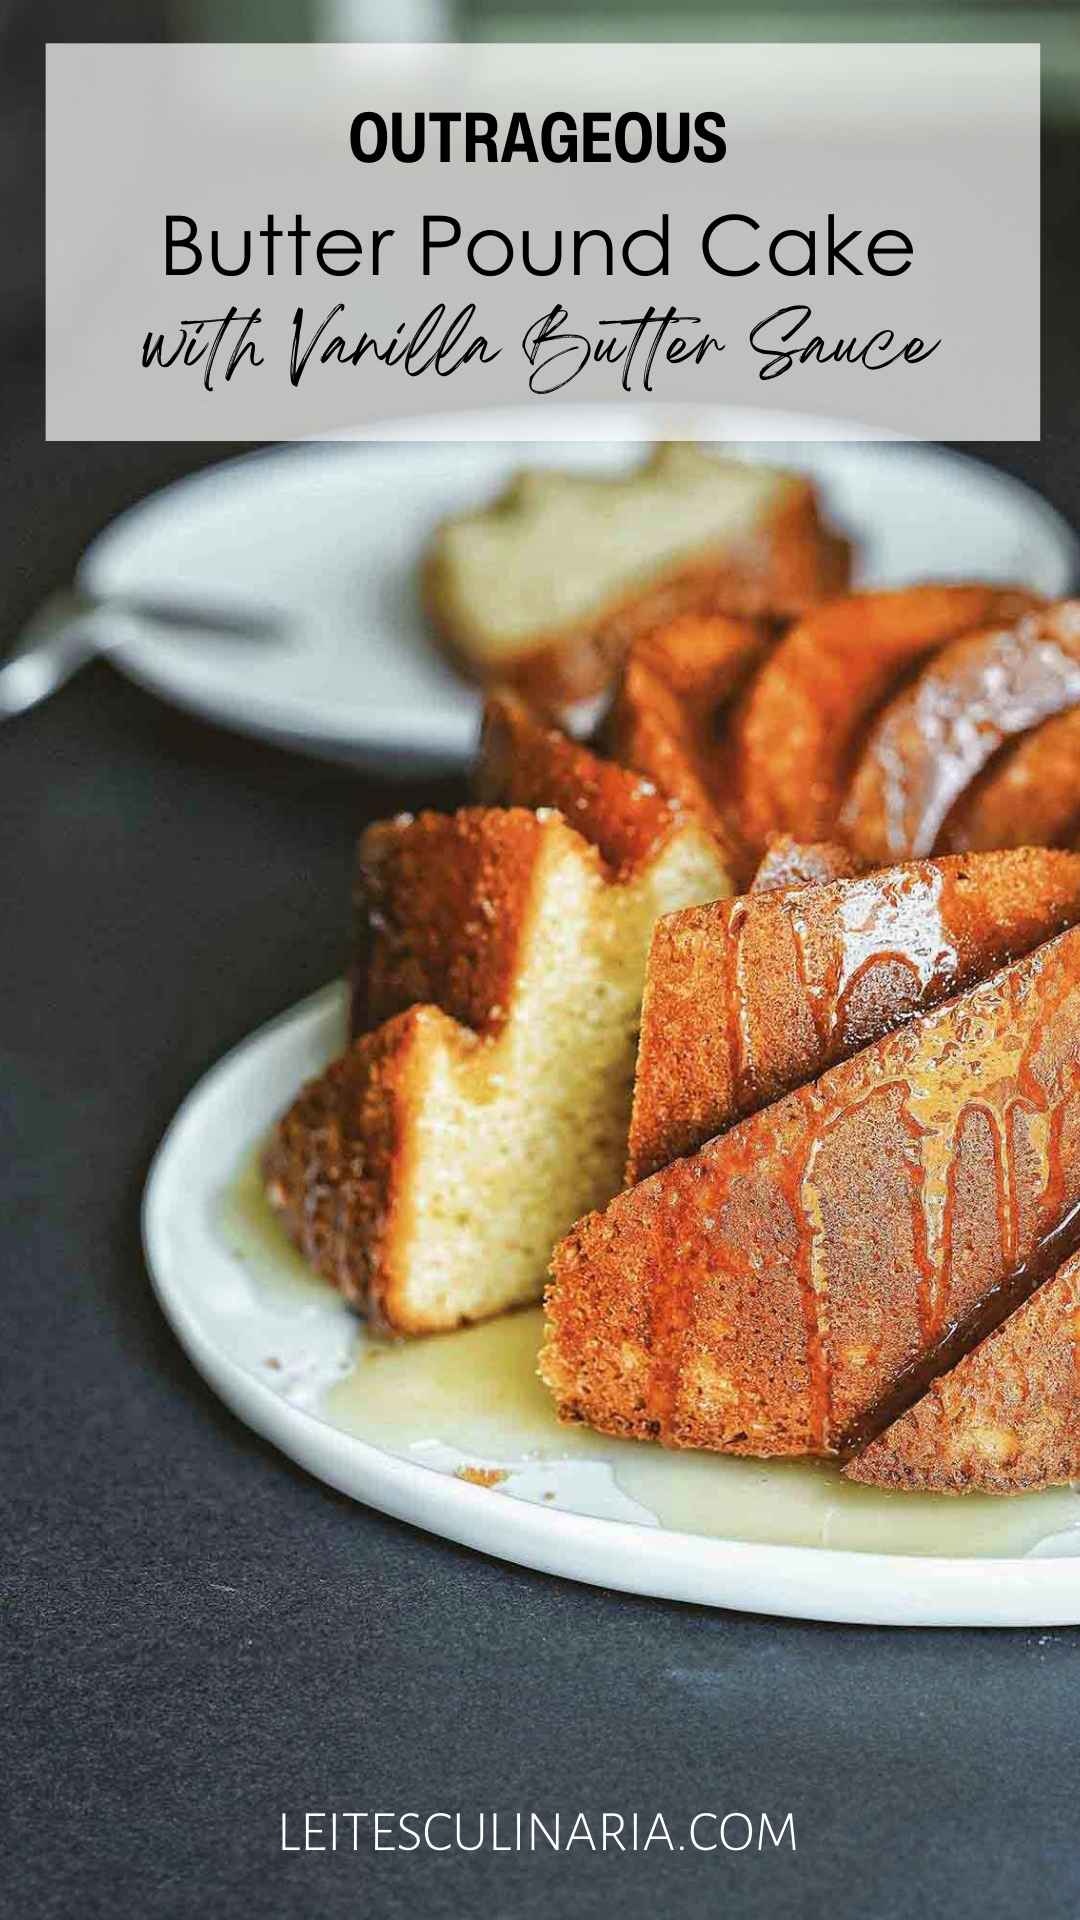 A Kentucky butter cake on a platter with glazed drizzled over it and one slice cut from it.